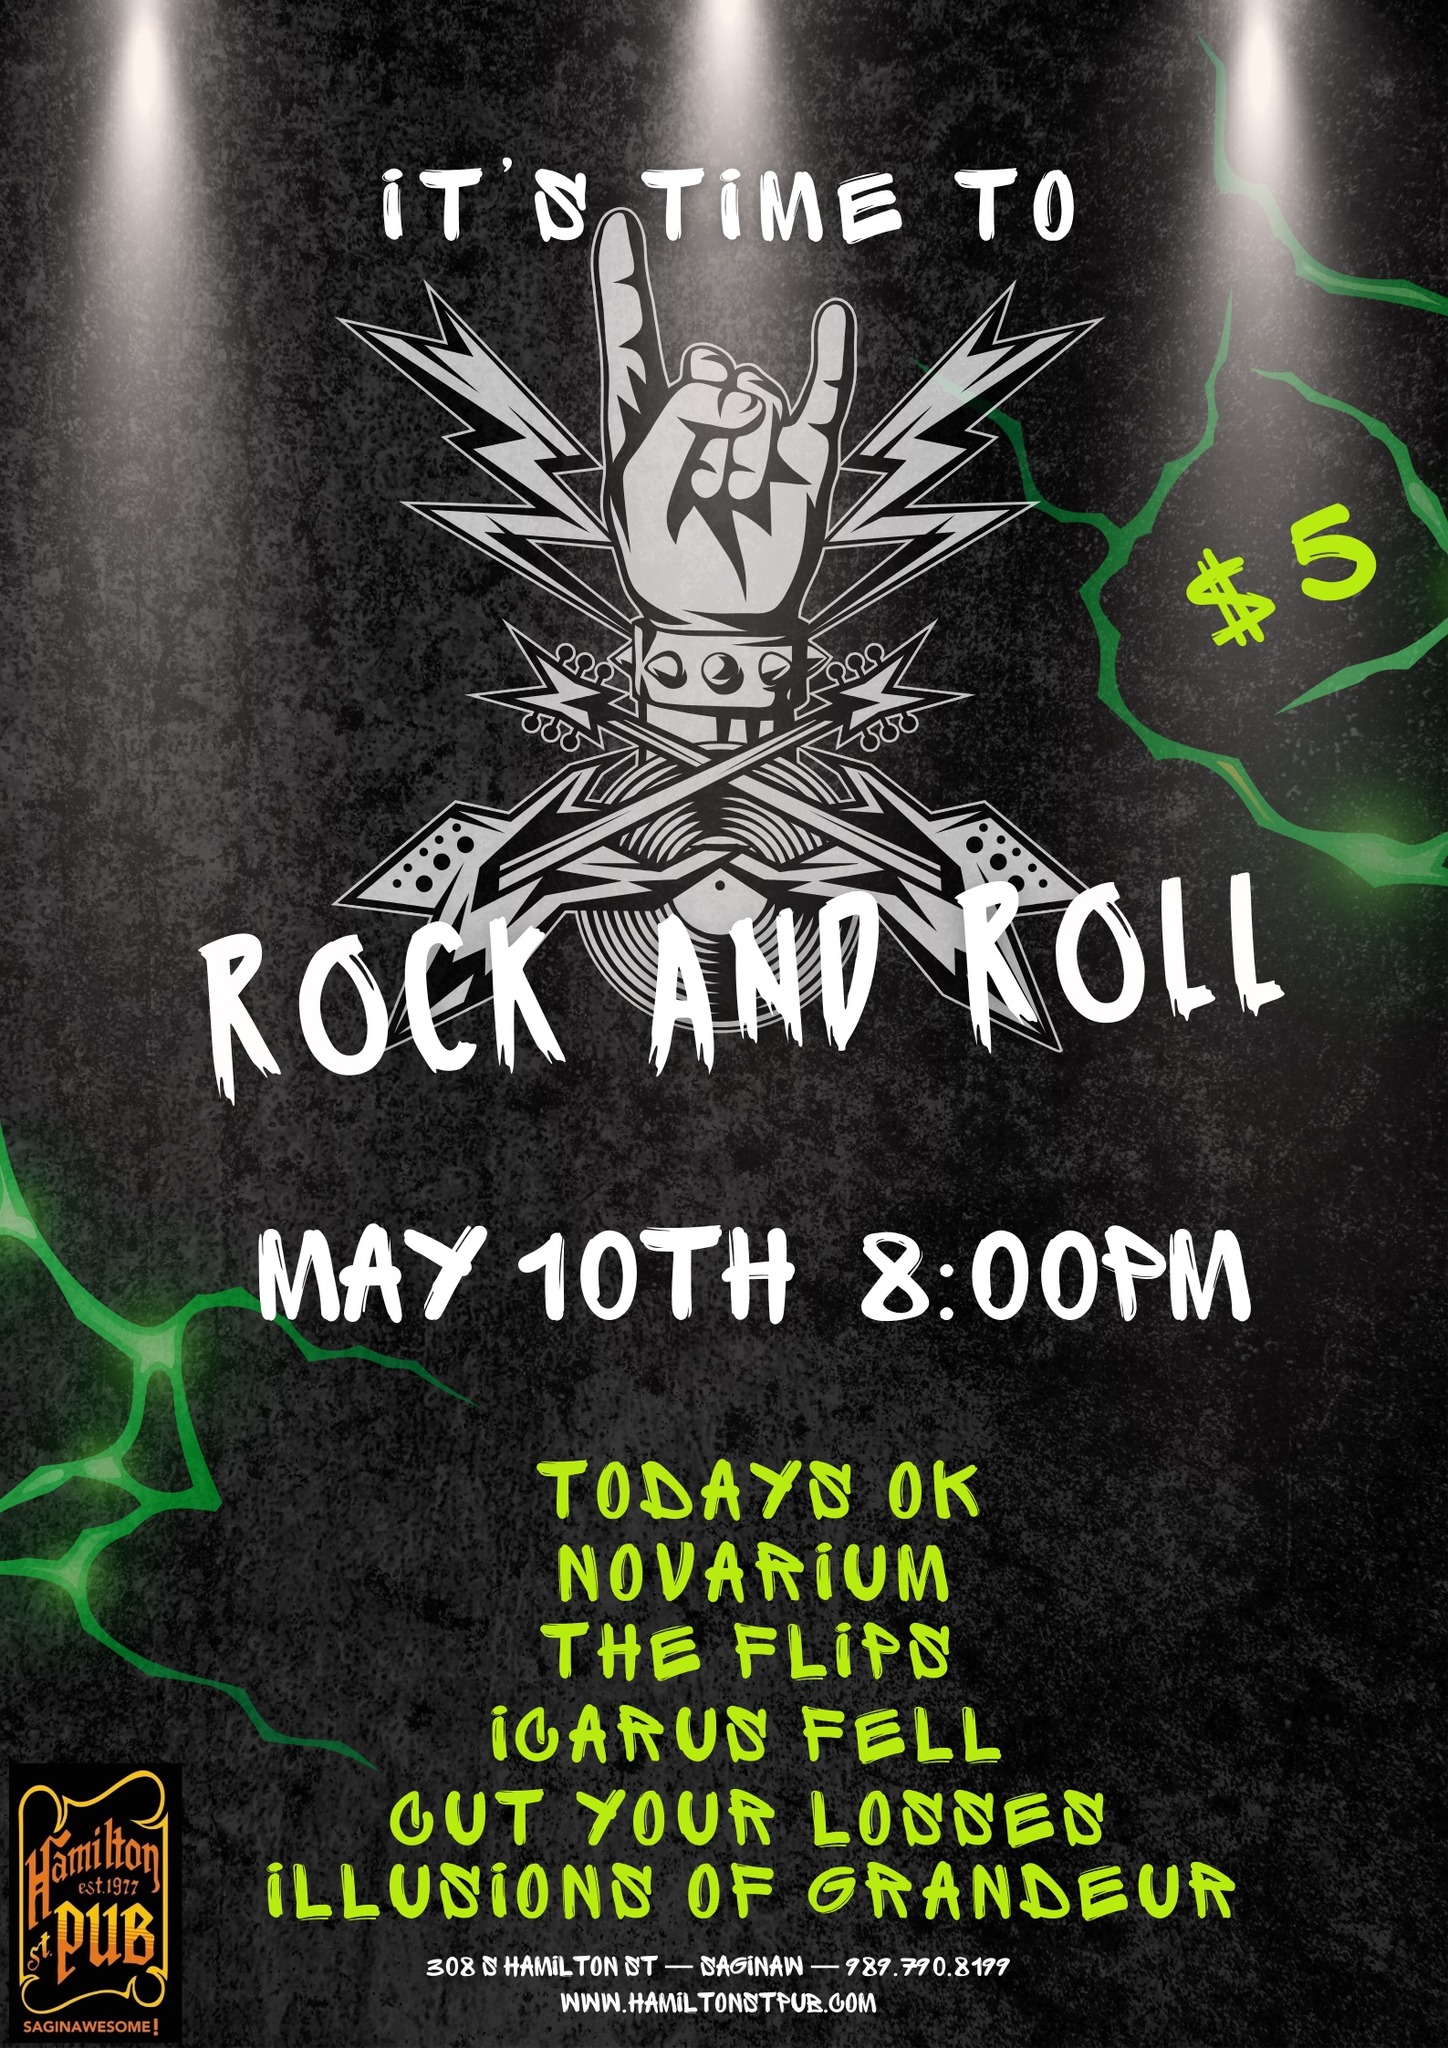 TIME TO ROCK! SIX LIVE BANDS